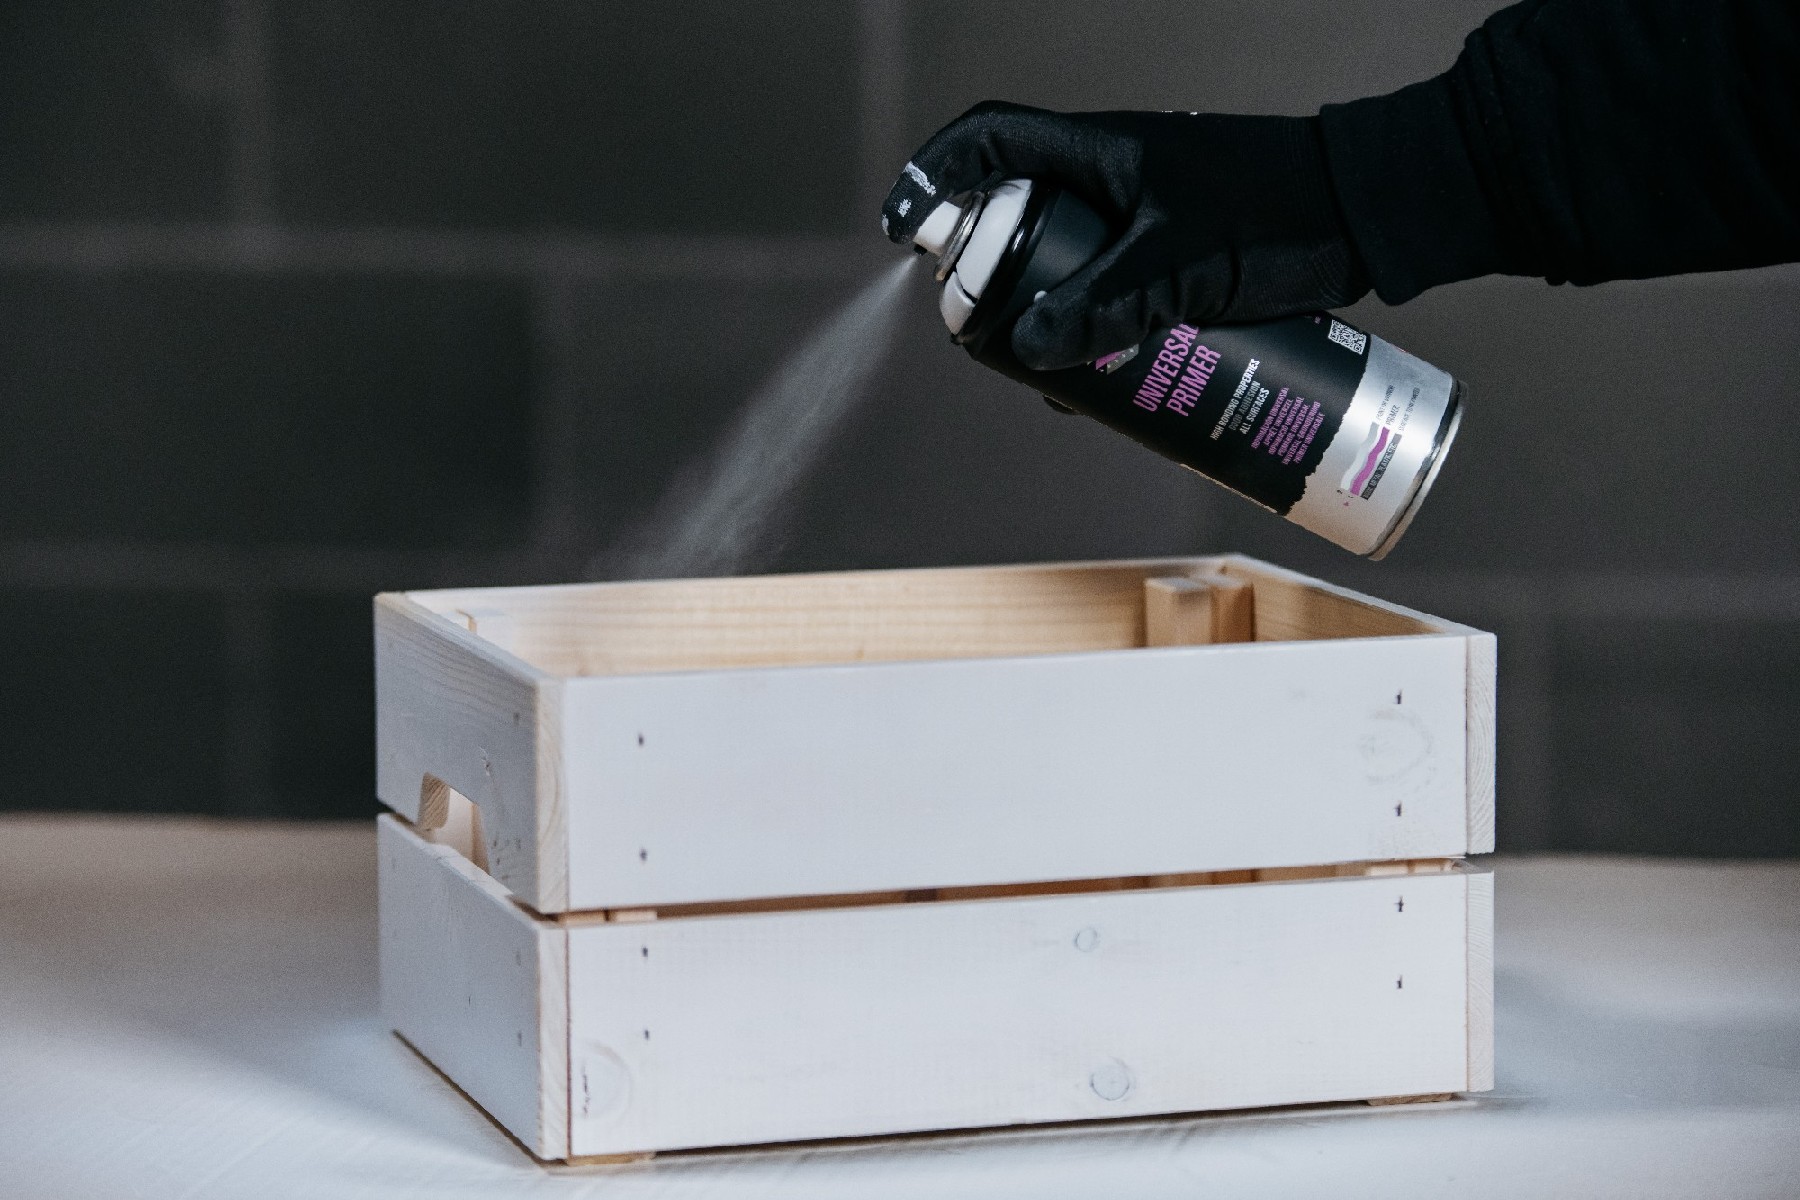 Find out when to use primer spray paint